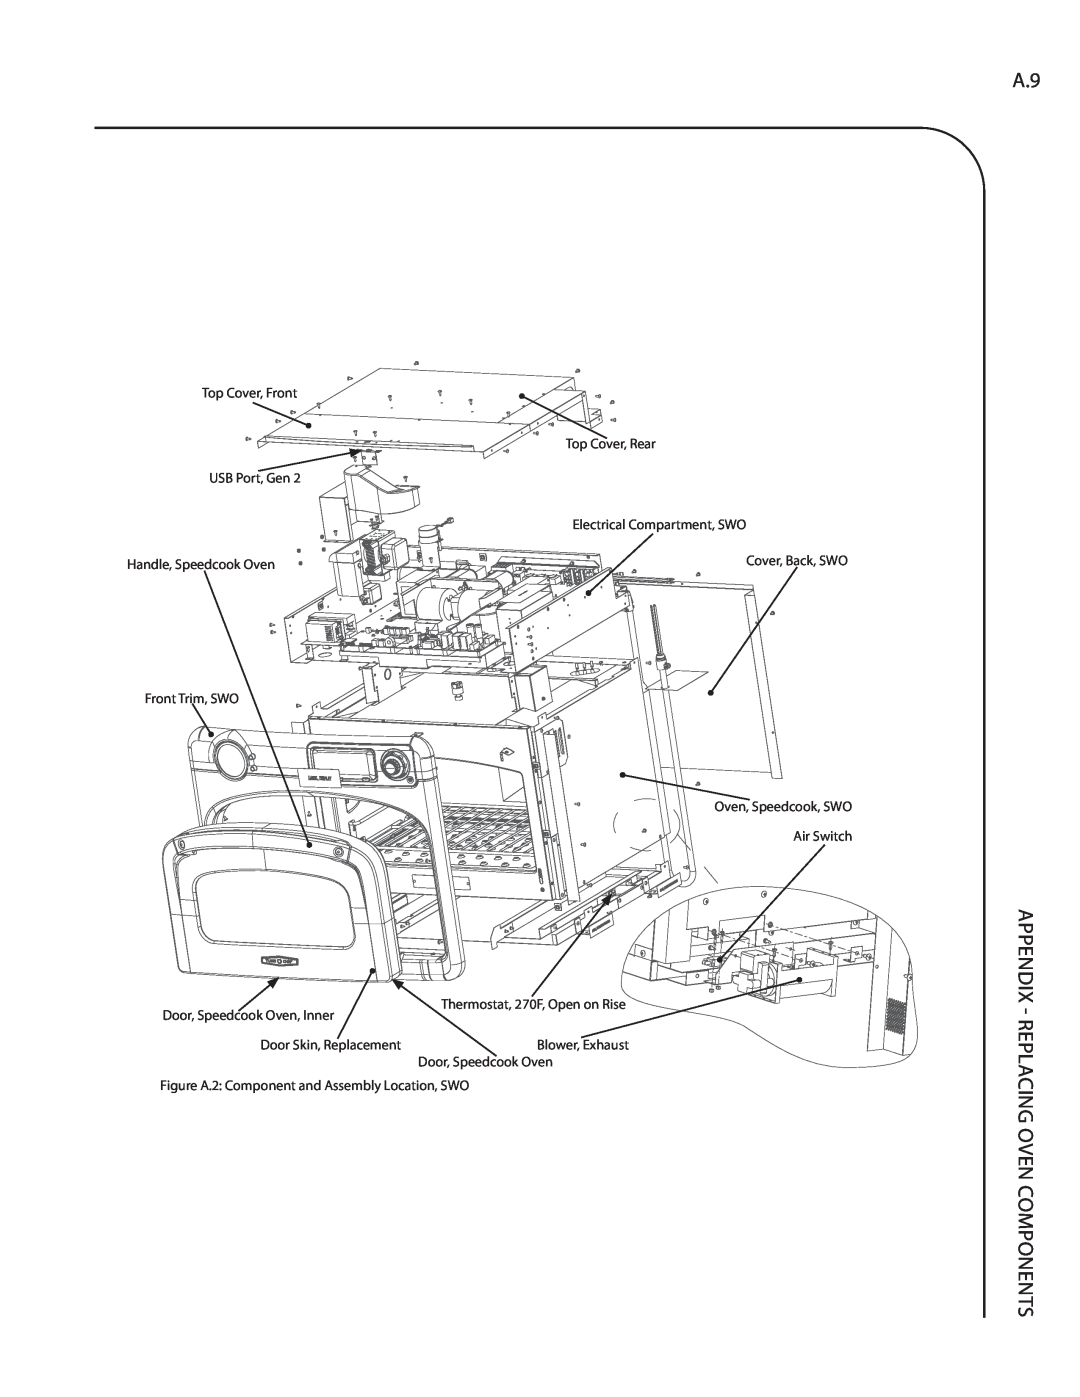 Turbo Chef Technologies Residential Single and Double Wall Oven Appendix - Replacing Oven Components, Cover, Back, SWO 